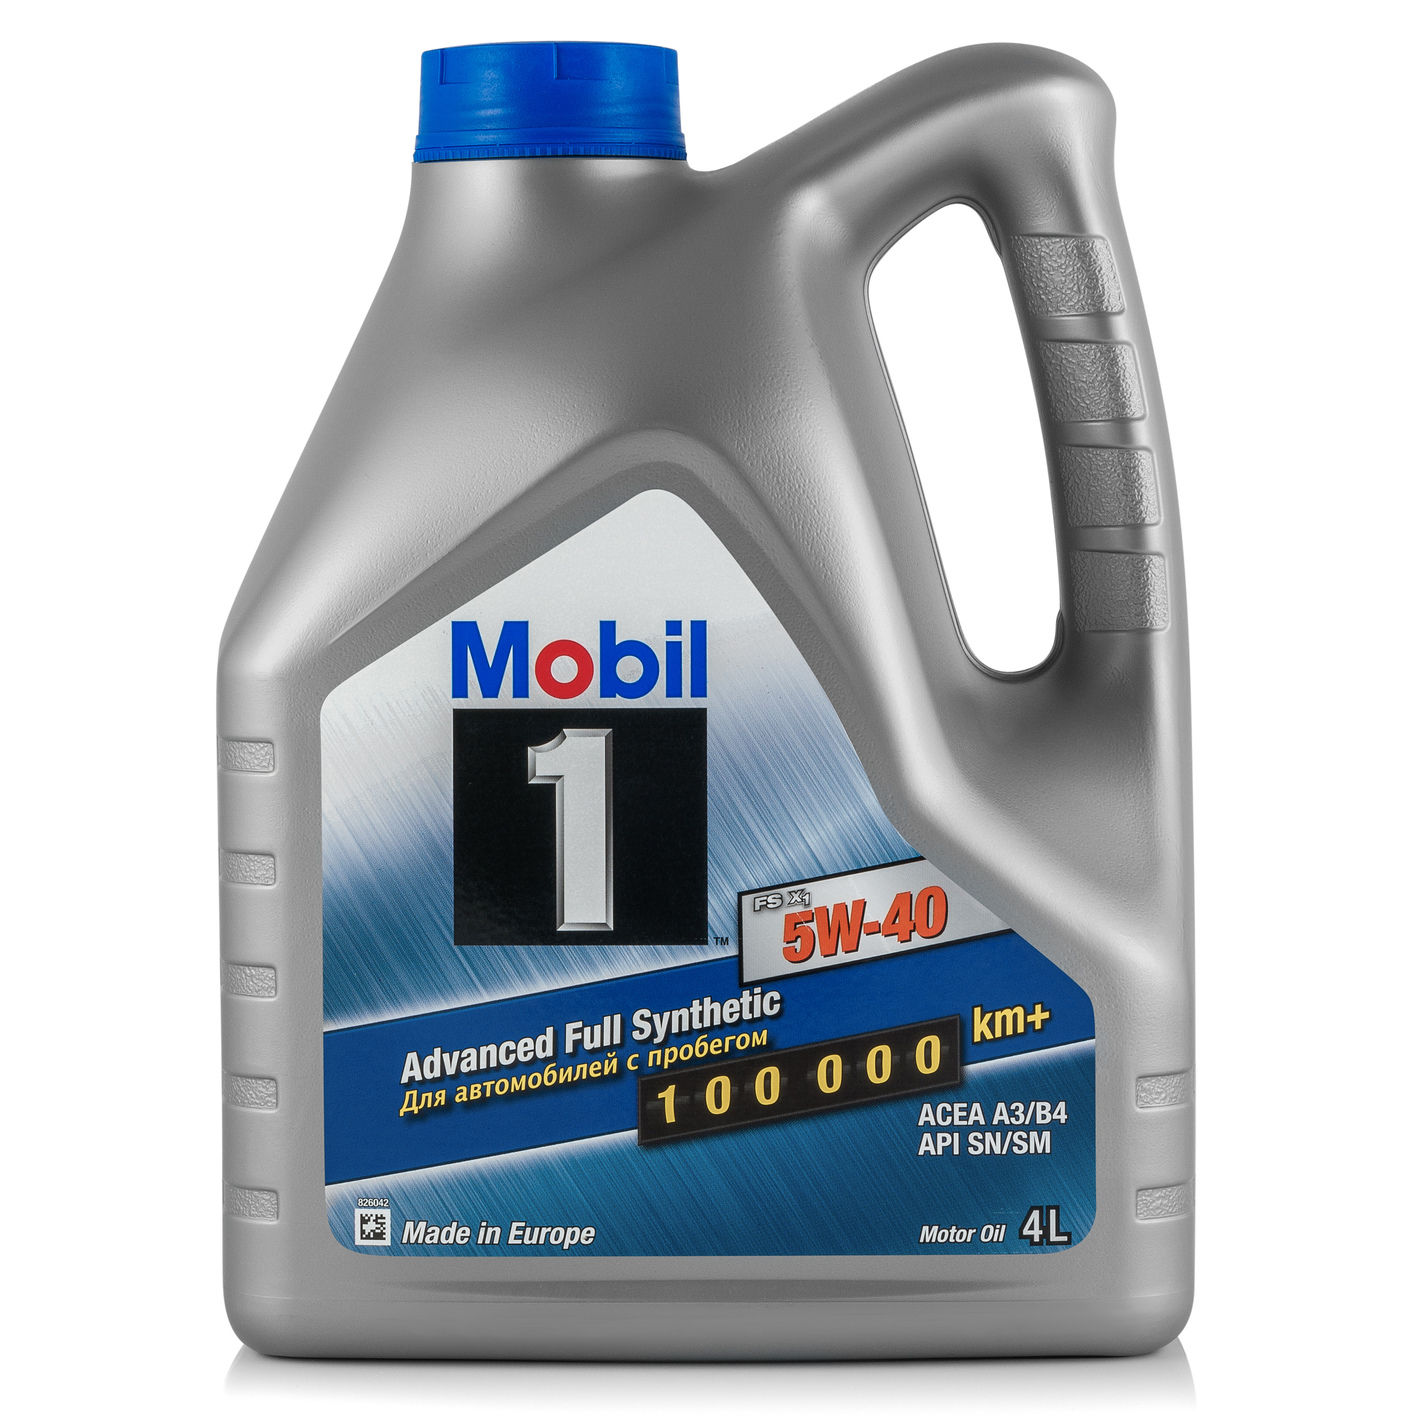 Mobil Engine oil Mobil 1 Full Synthetic 5W-40, 4L – price